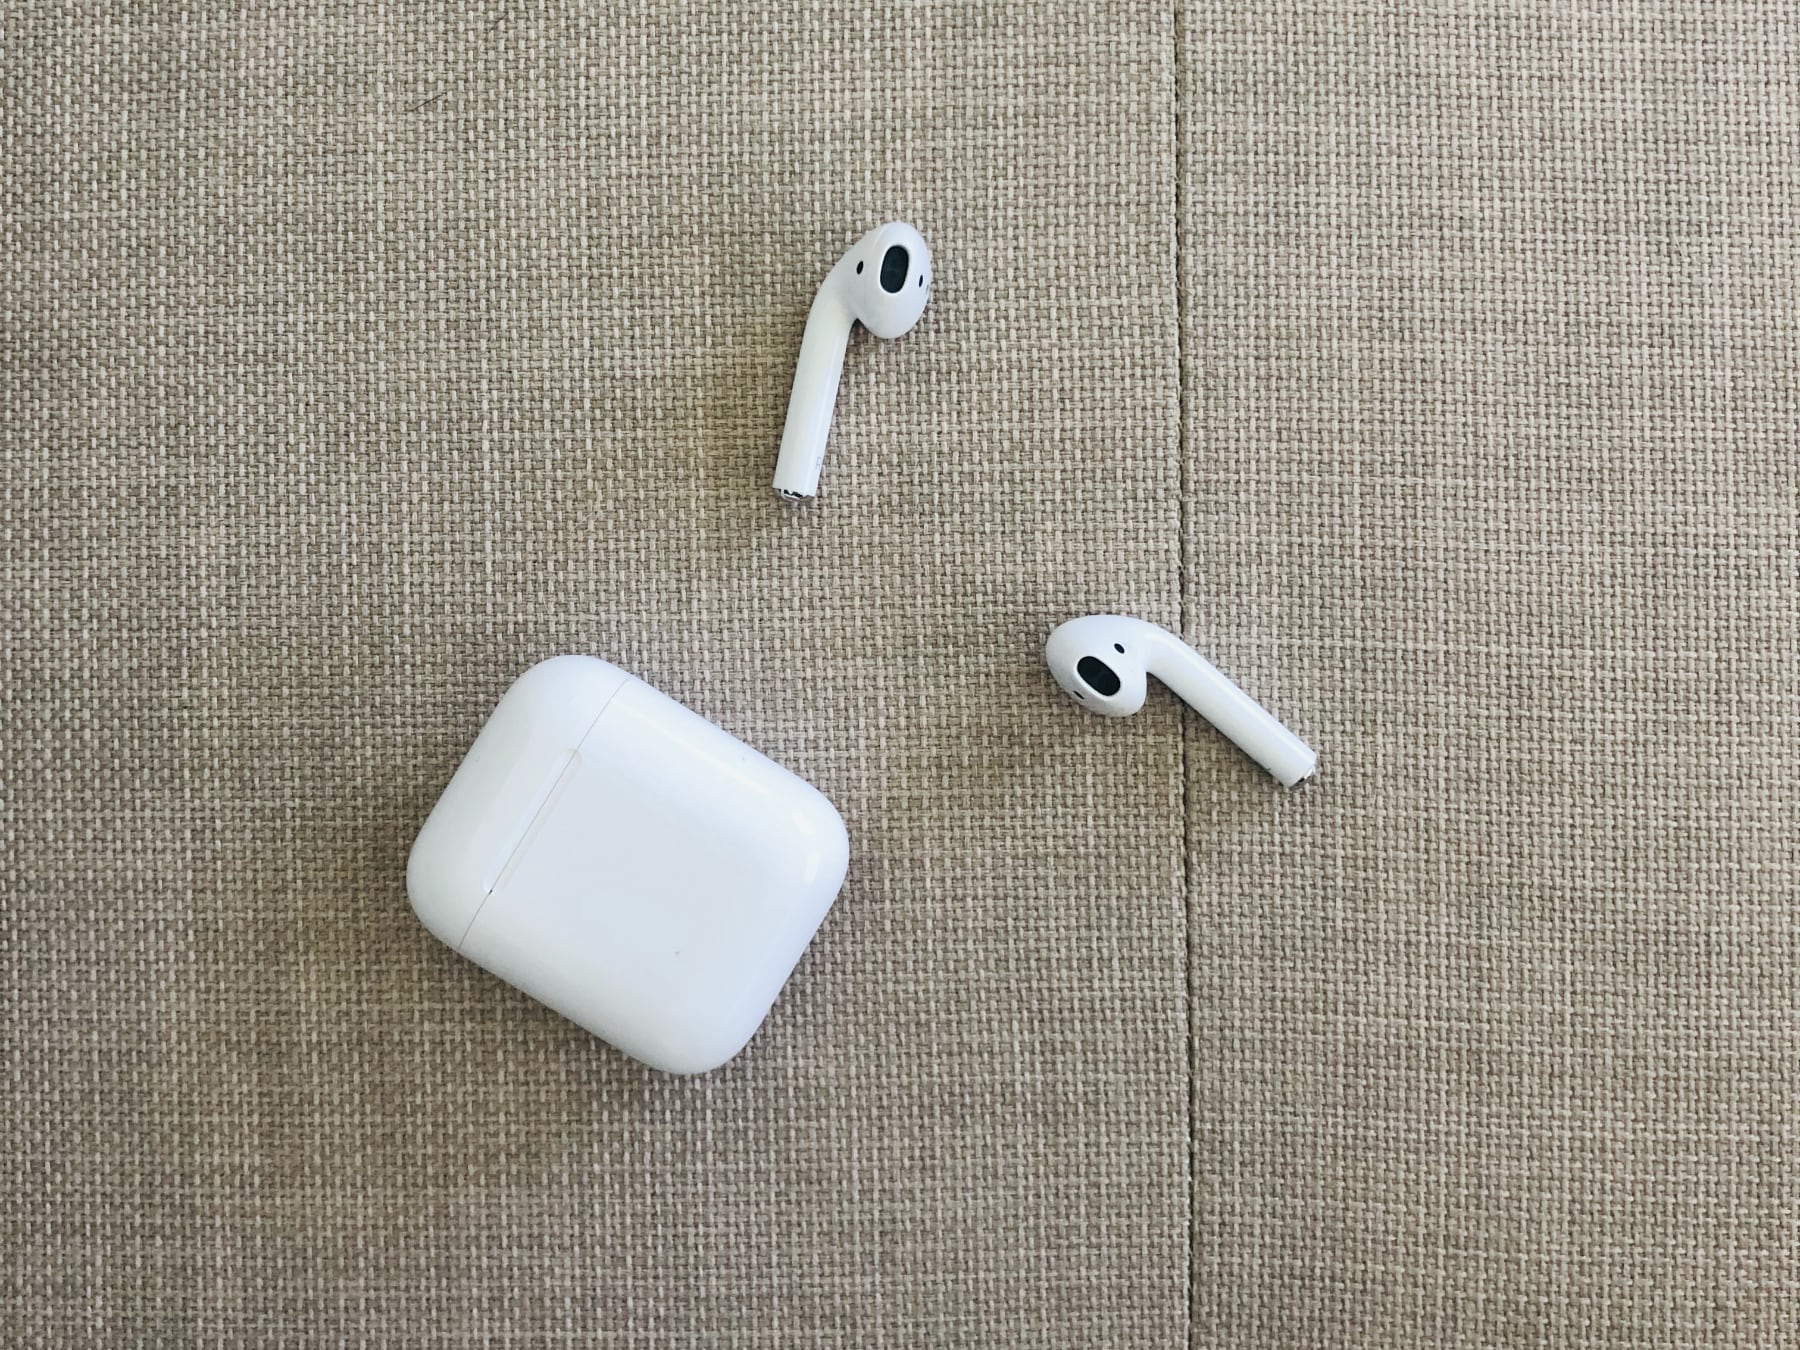 Second generation Airpods outside of charging case